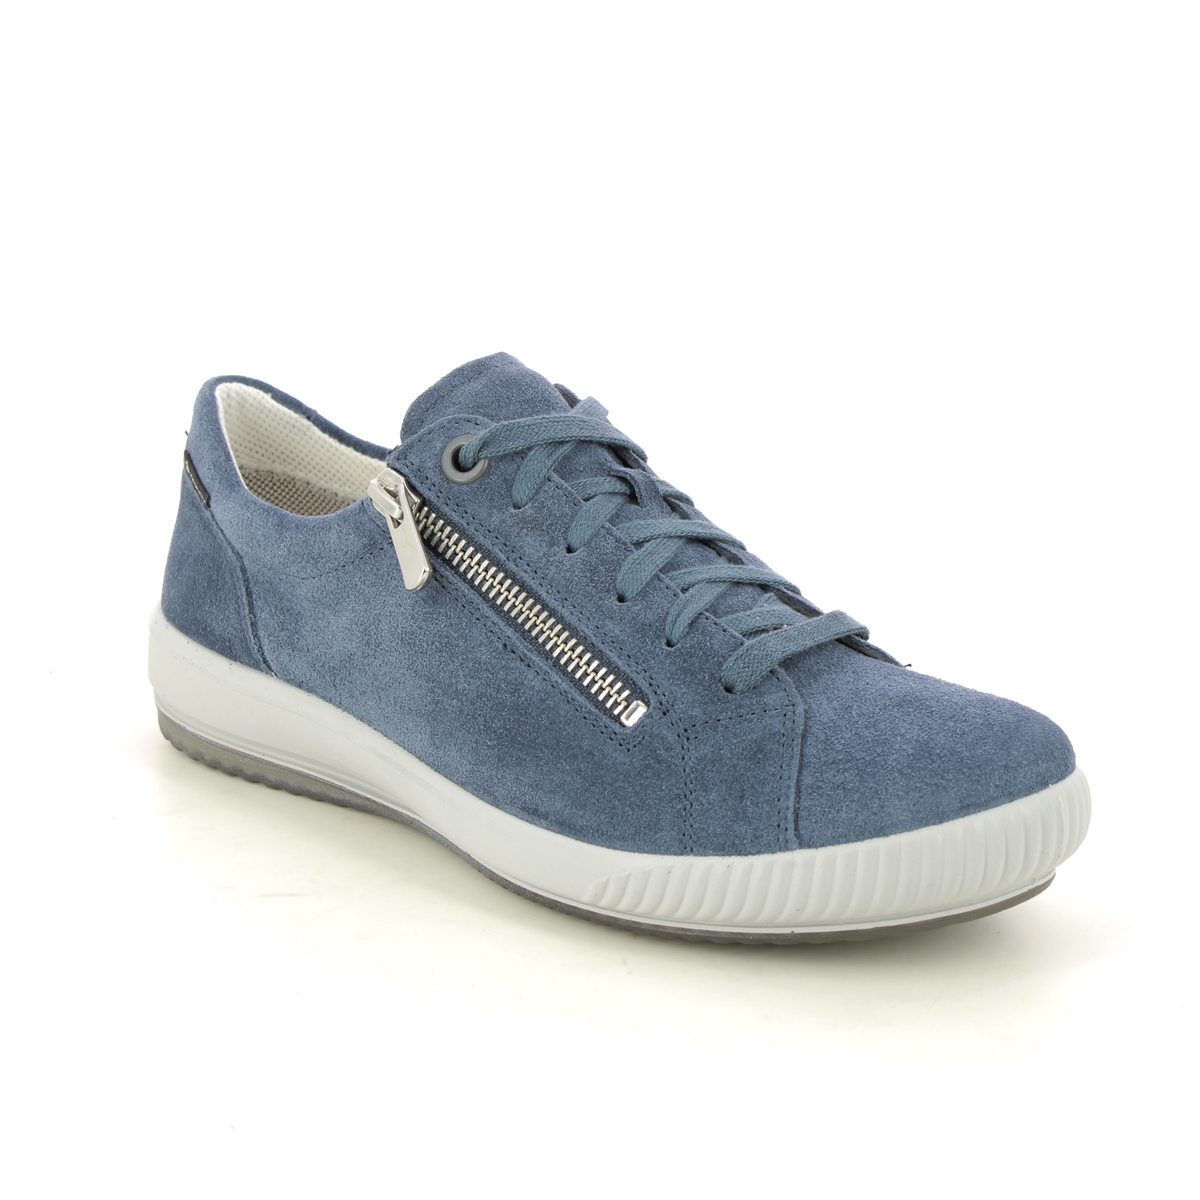 Legero Tanaro 5 Gtx Blue Suede Womens Lacing Shoes 2000219-8600 In Size 8 In Plain Blue Suede